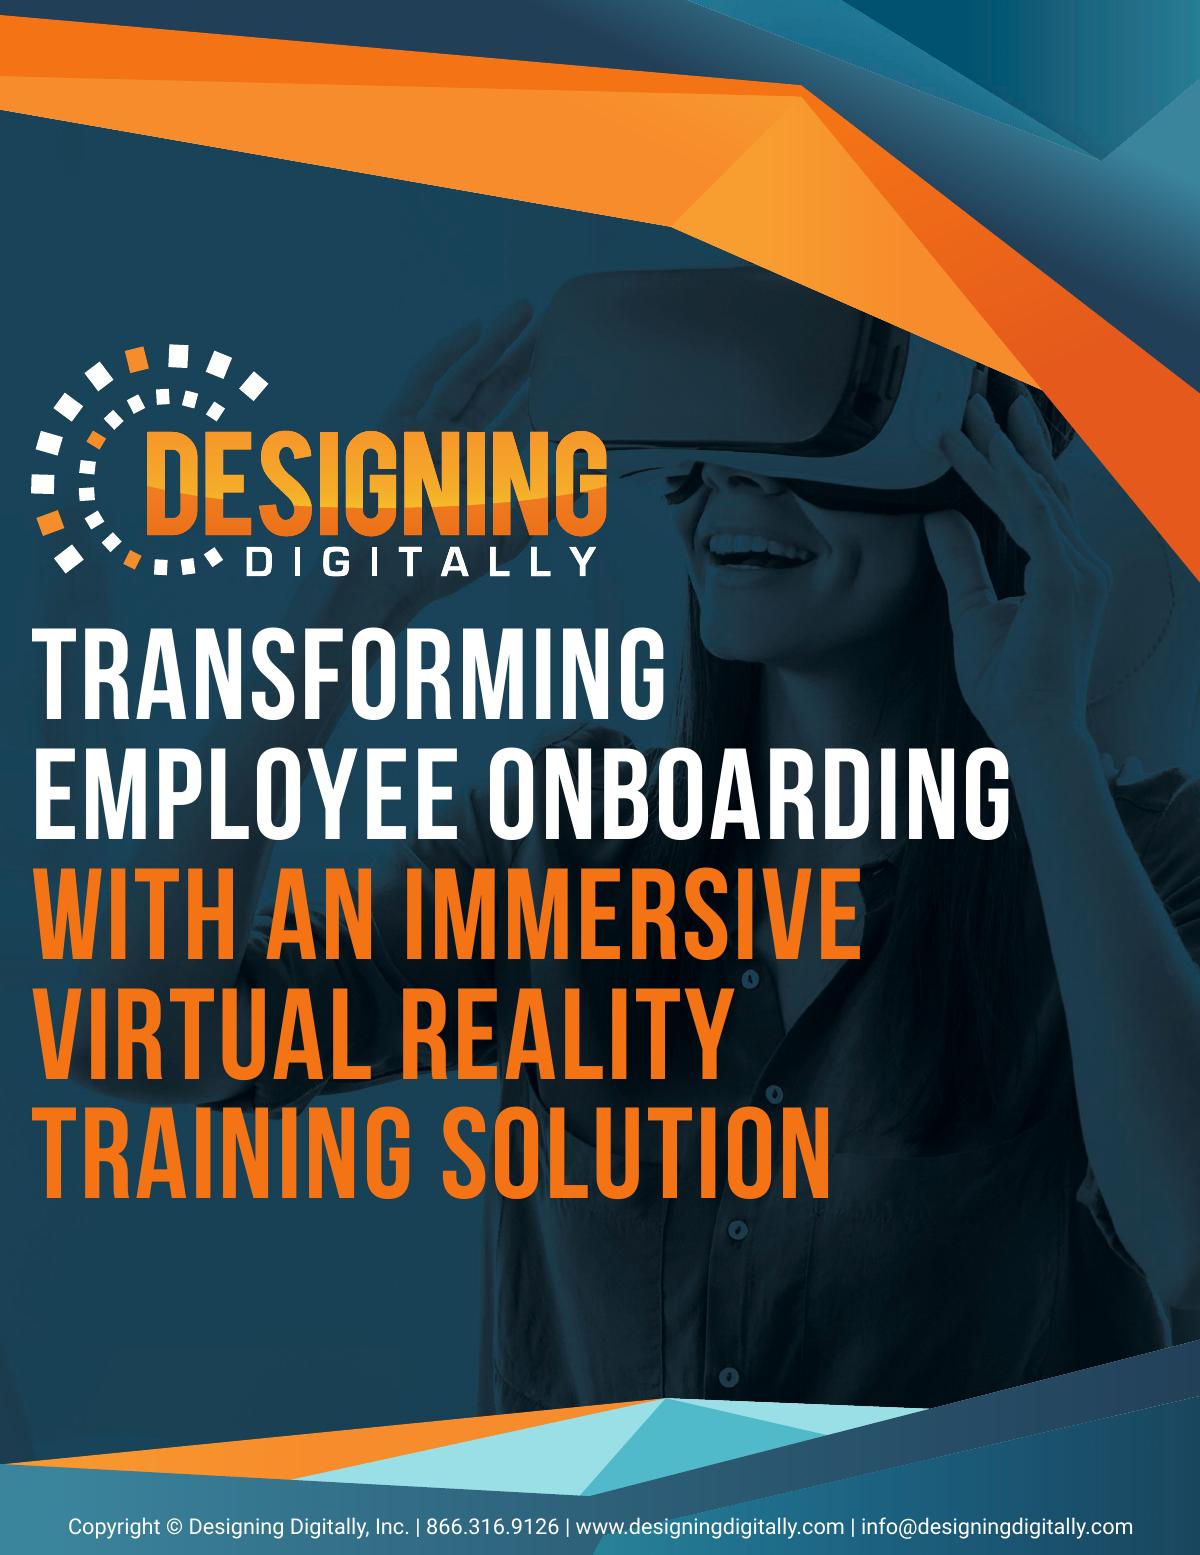 Transforming Employee Onboarding with an Immersive Virtual Reality Training Solution